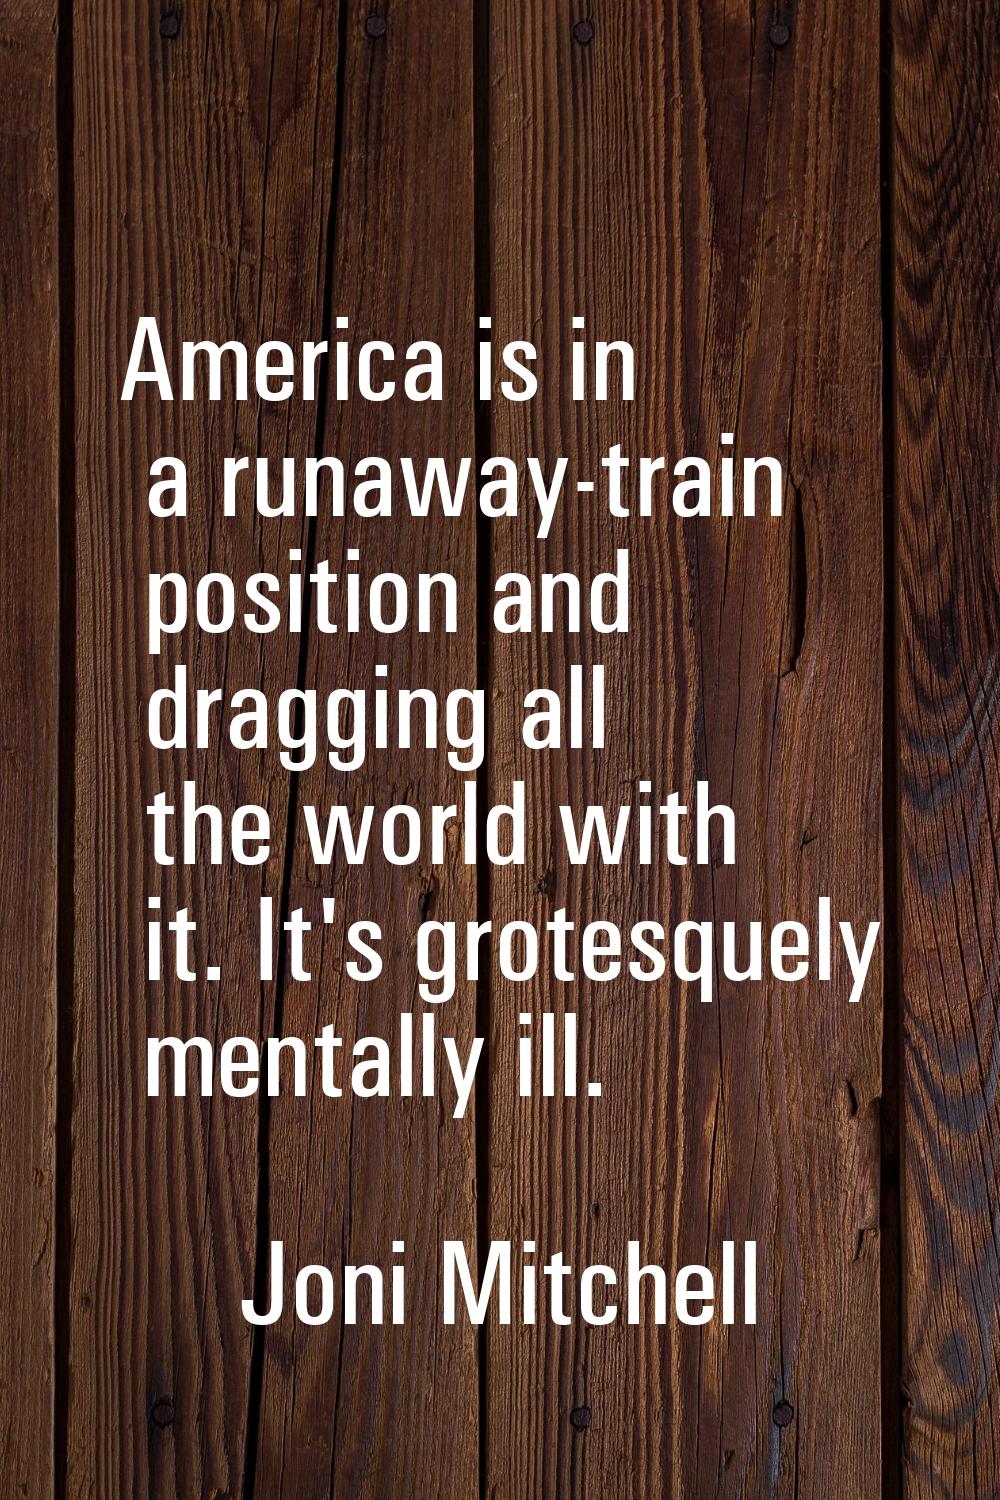 America is in a runaway-train position and dragging all the world with it. It's grotesquely mentall